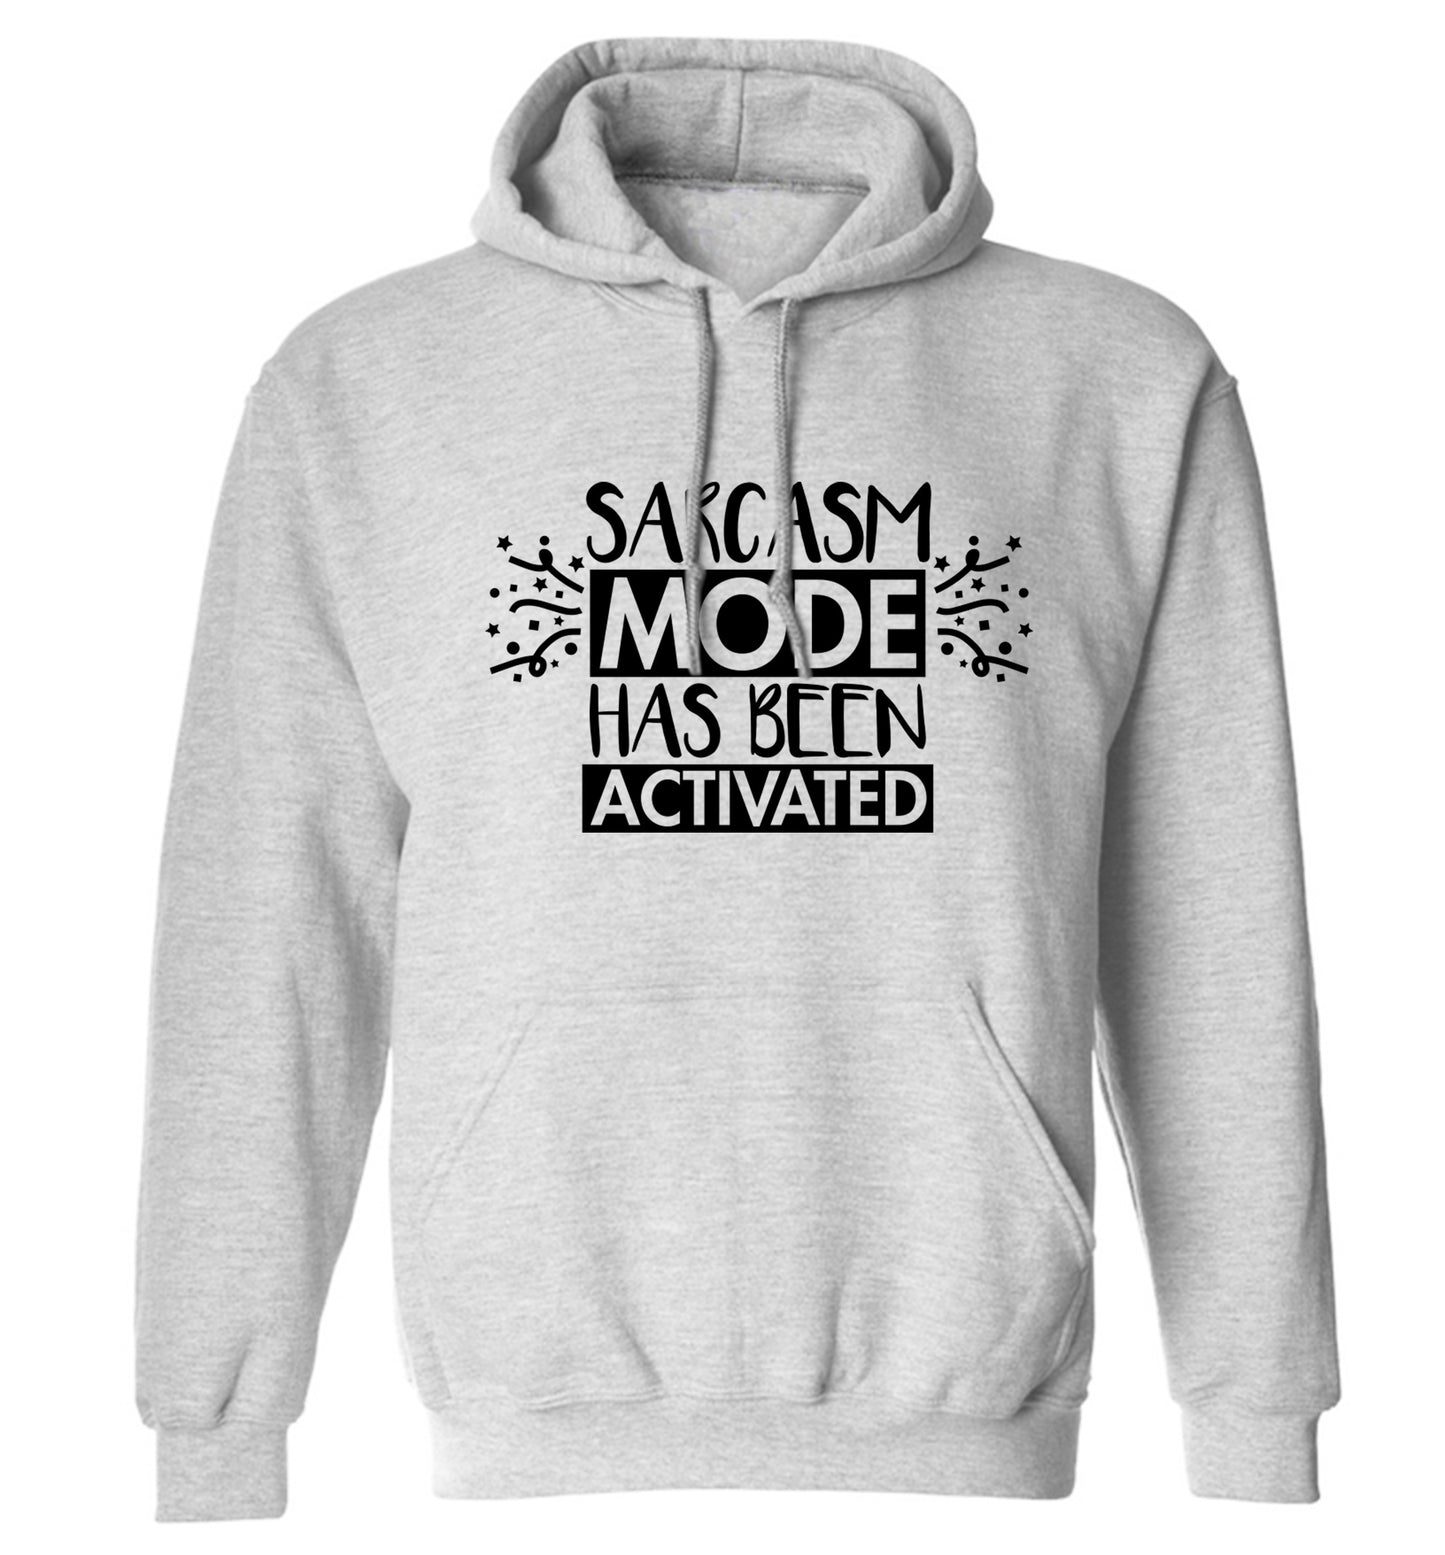 Sarcarsm mode has been activated adults unisex grey hoodie 2XL